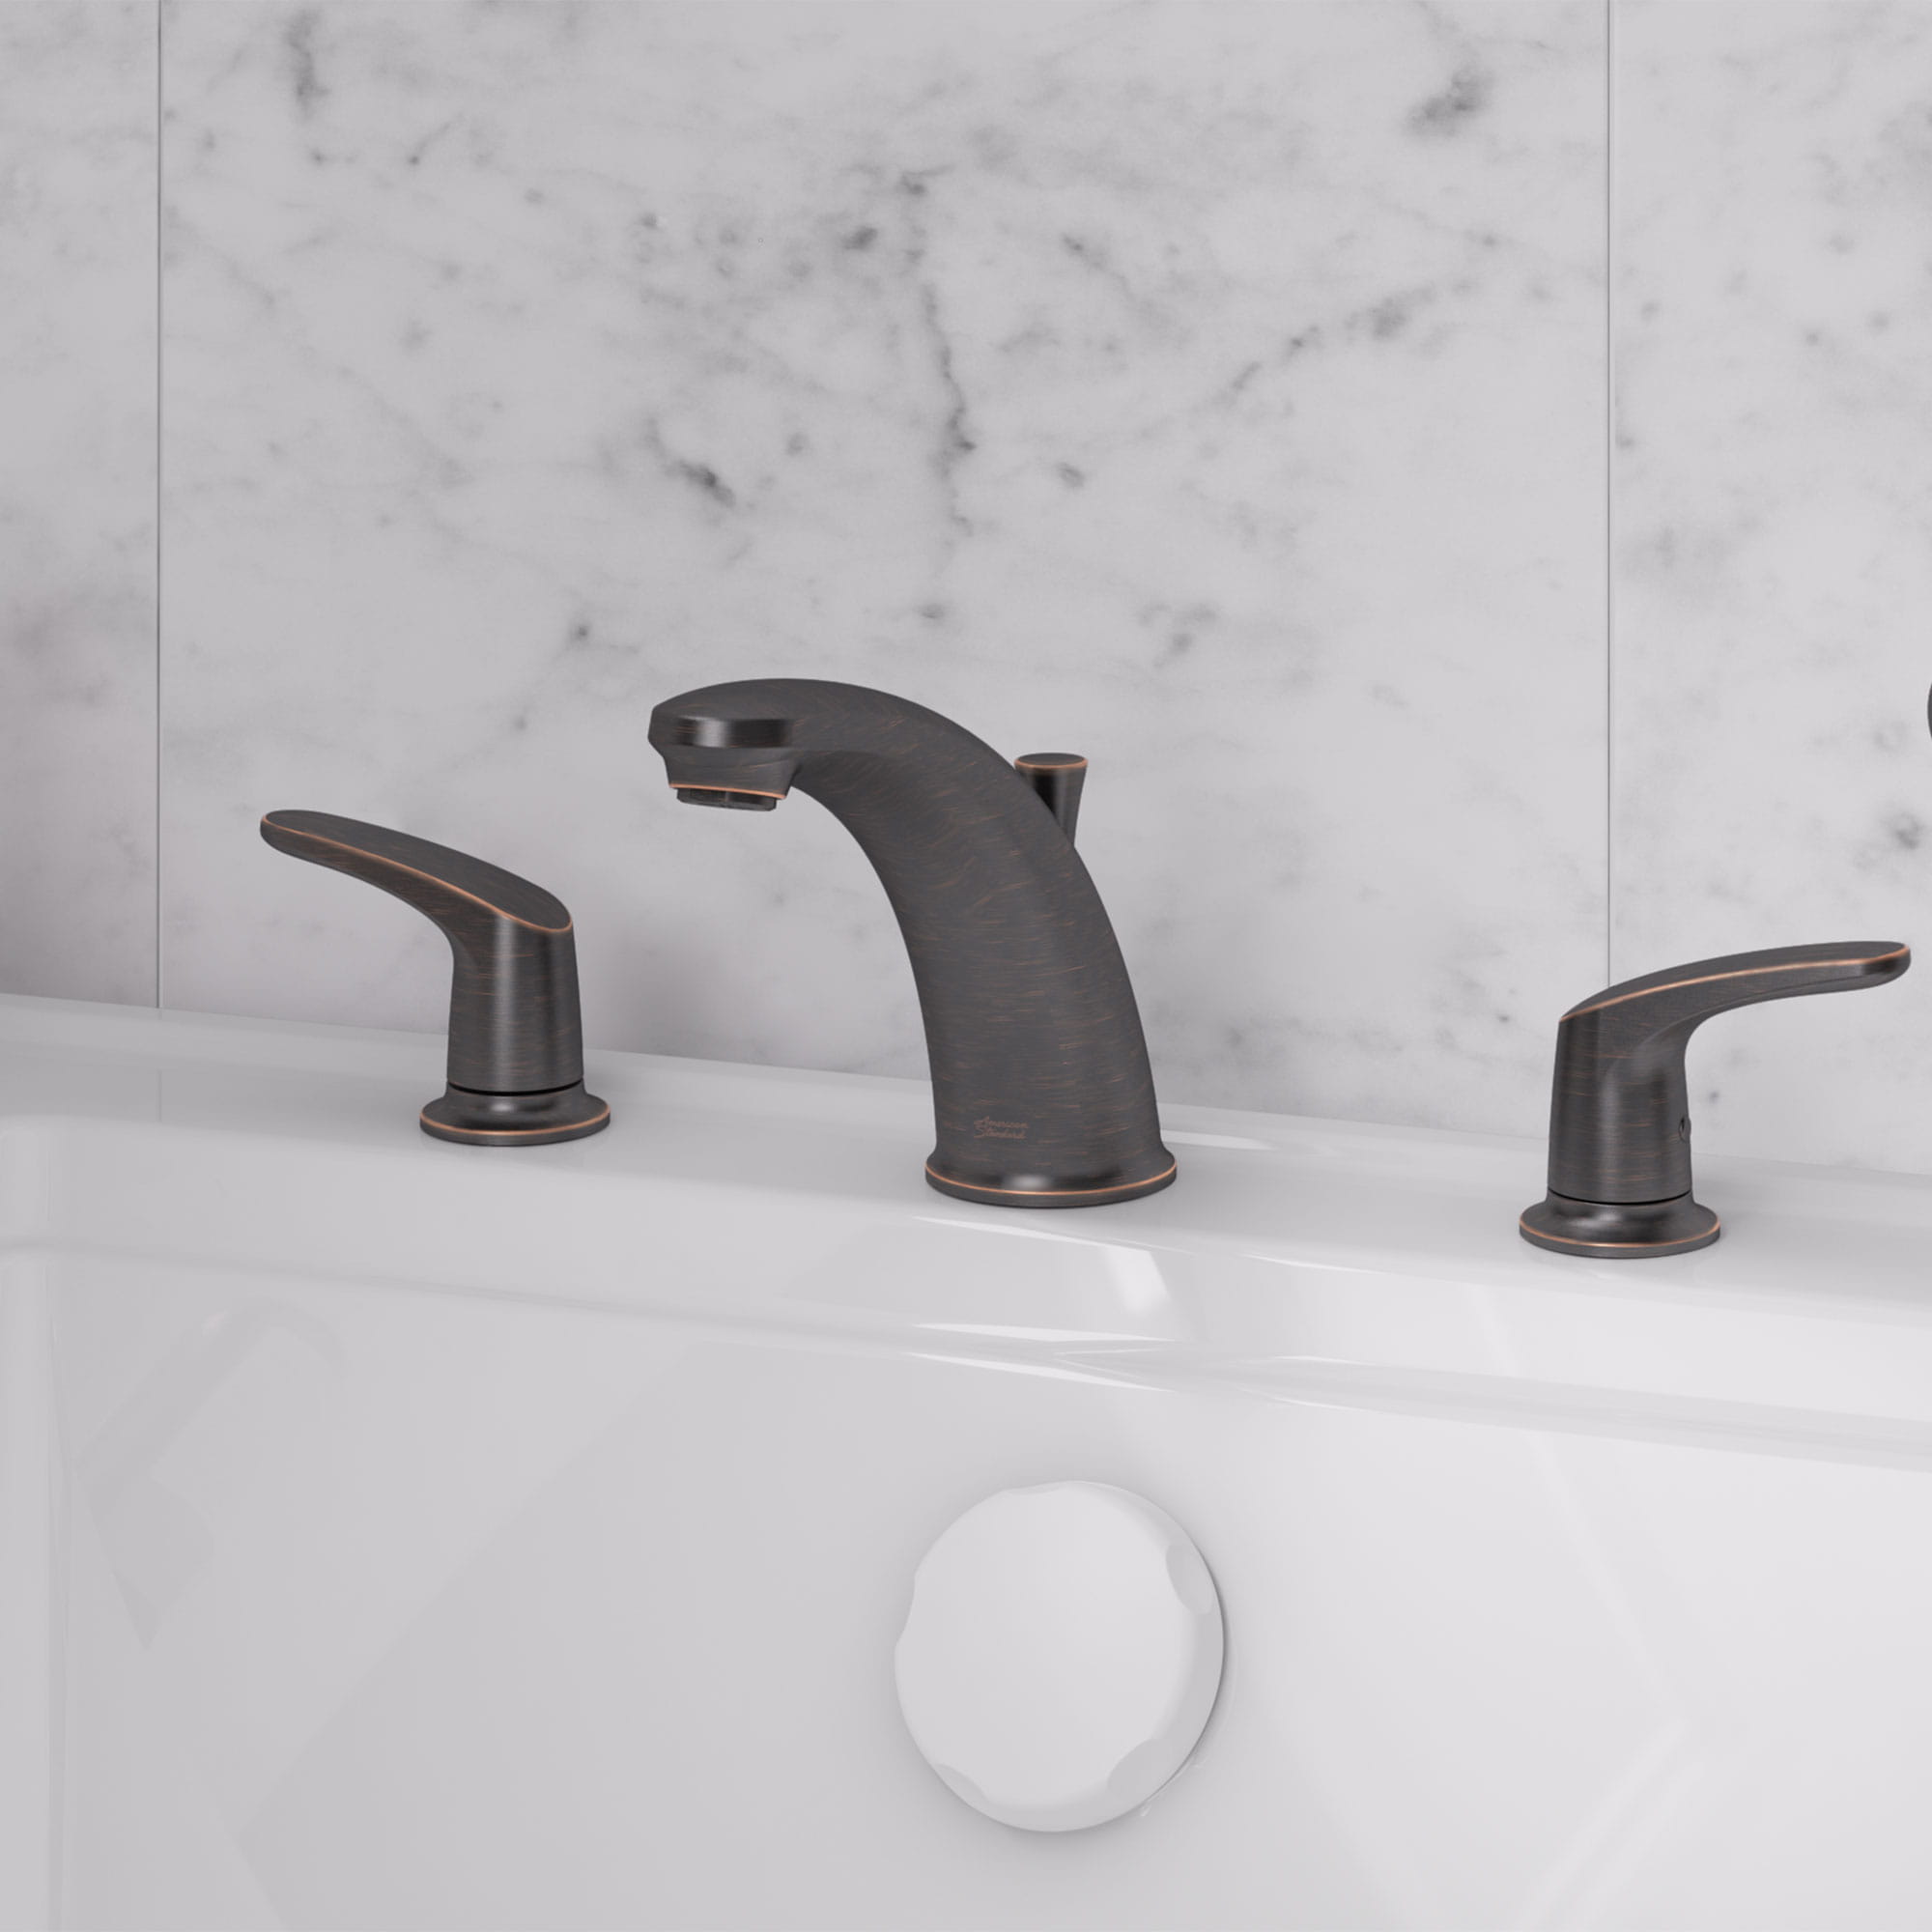 Colony PRO Bathtub Faucet Trim With Lever Handles for Flash Rough In Valve LEGACY BRONZE